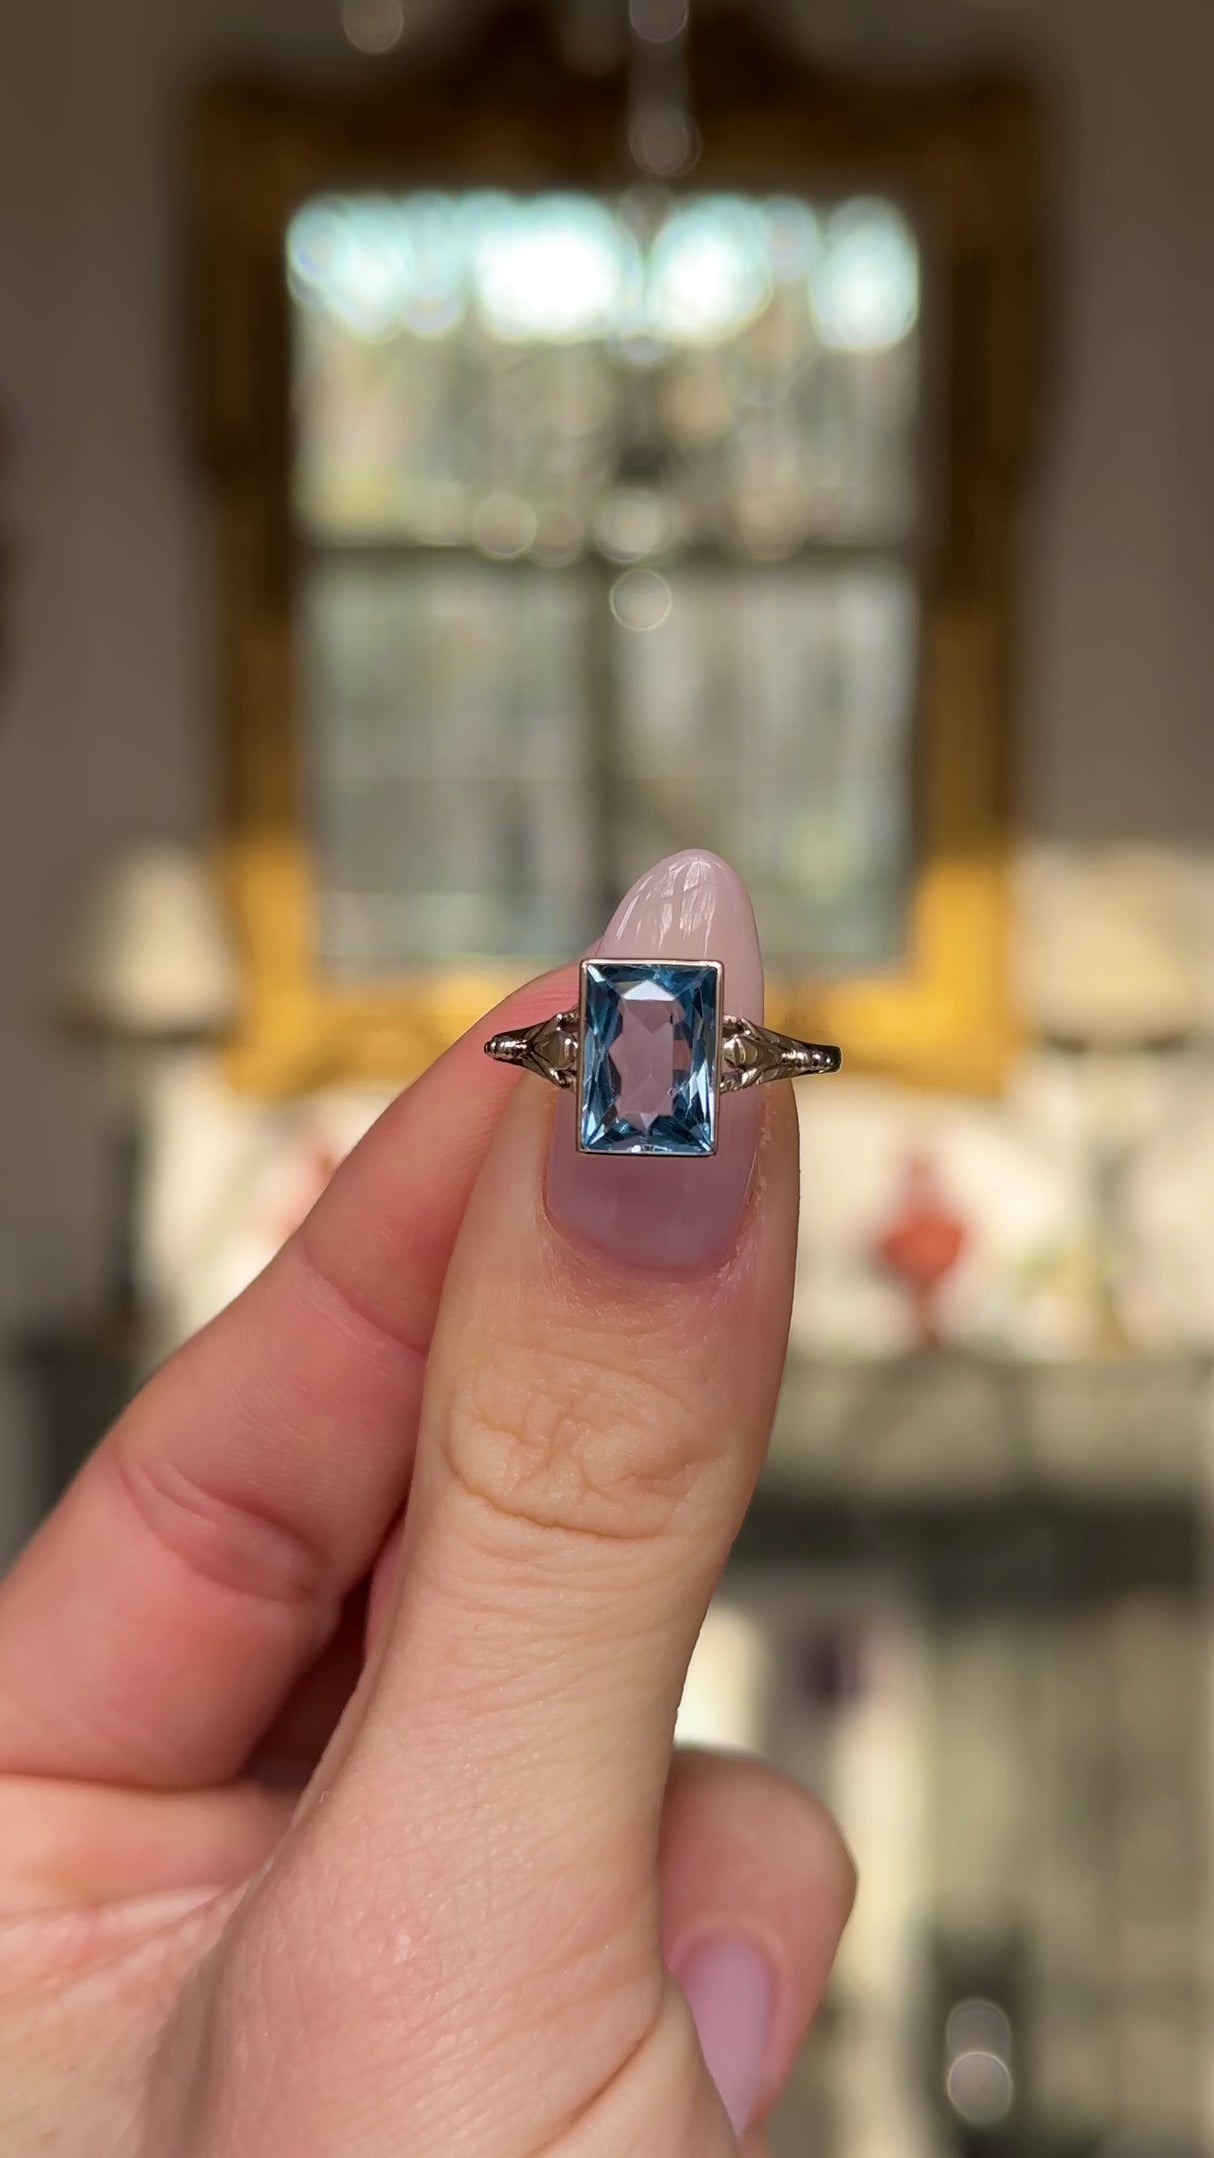 antique aquamarine single stone ring held in fingers and moved around to give perspective.